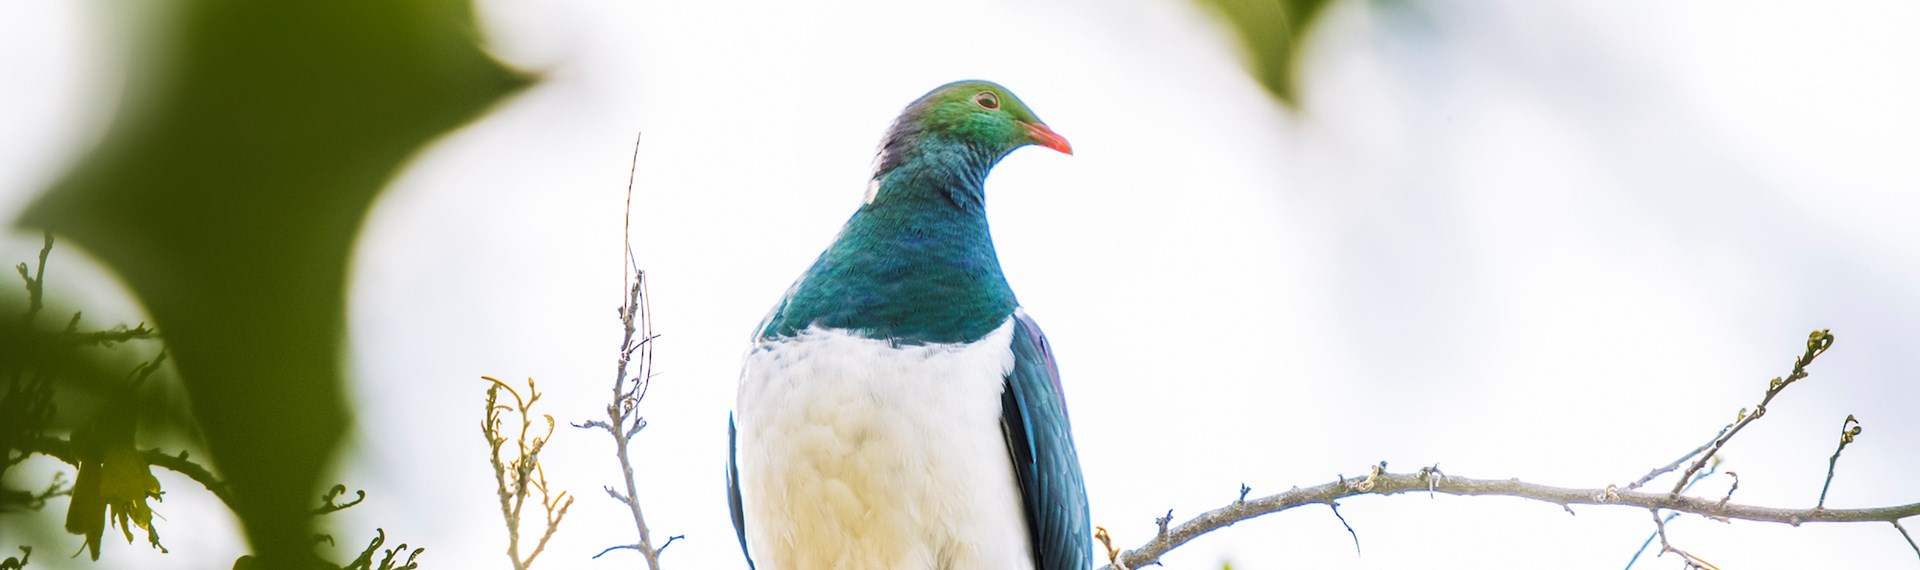  Kereru (native wood pigeons) often found frequenting the forests surrounding Punga Cove in the Marlborough Sounds in New Zealand's top of the South Island